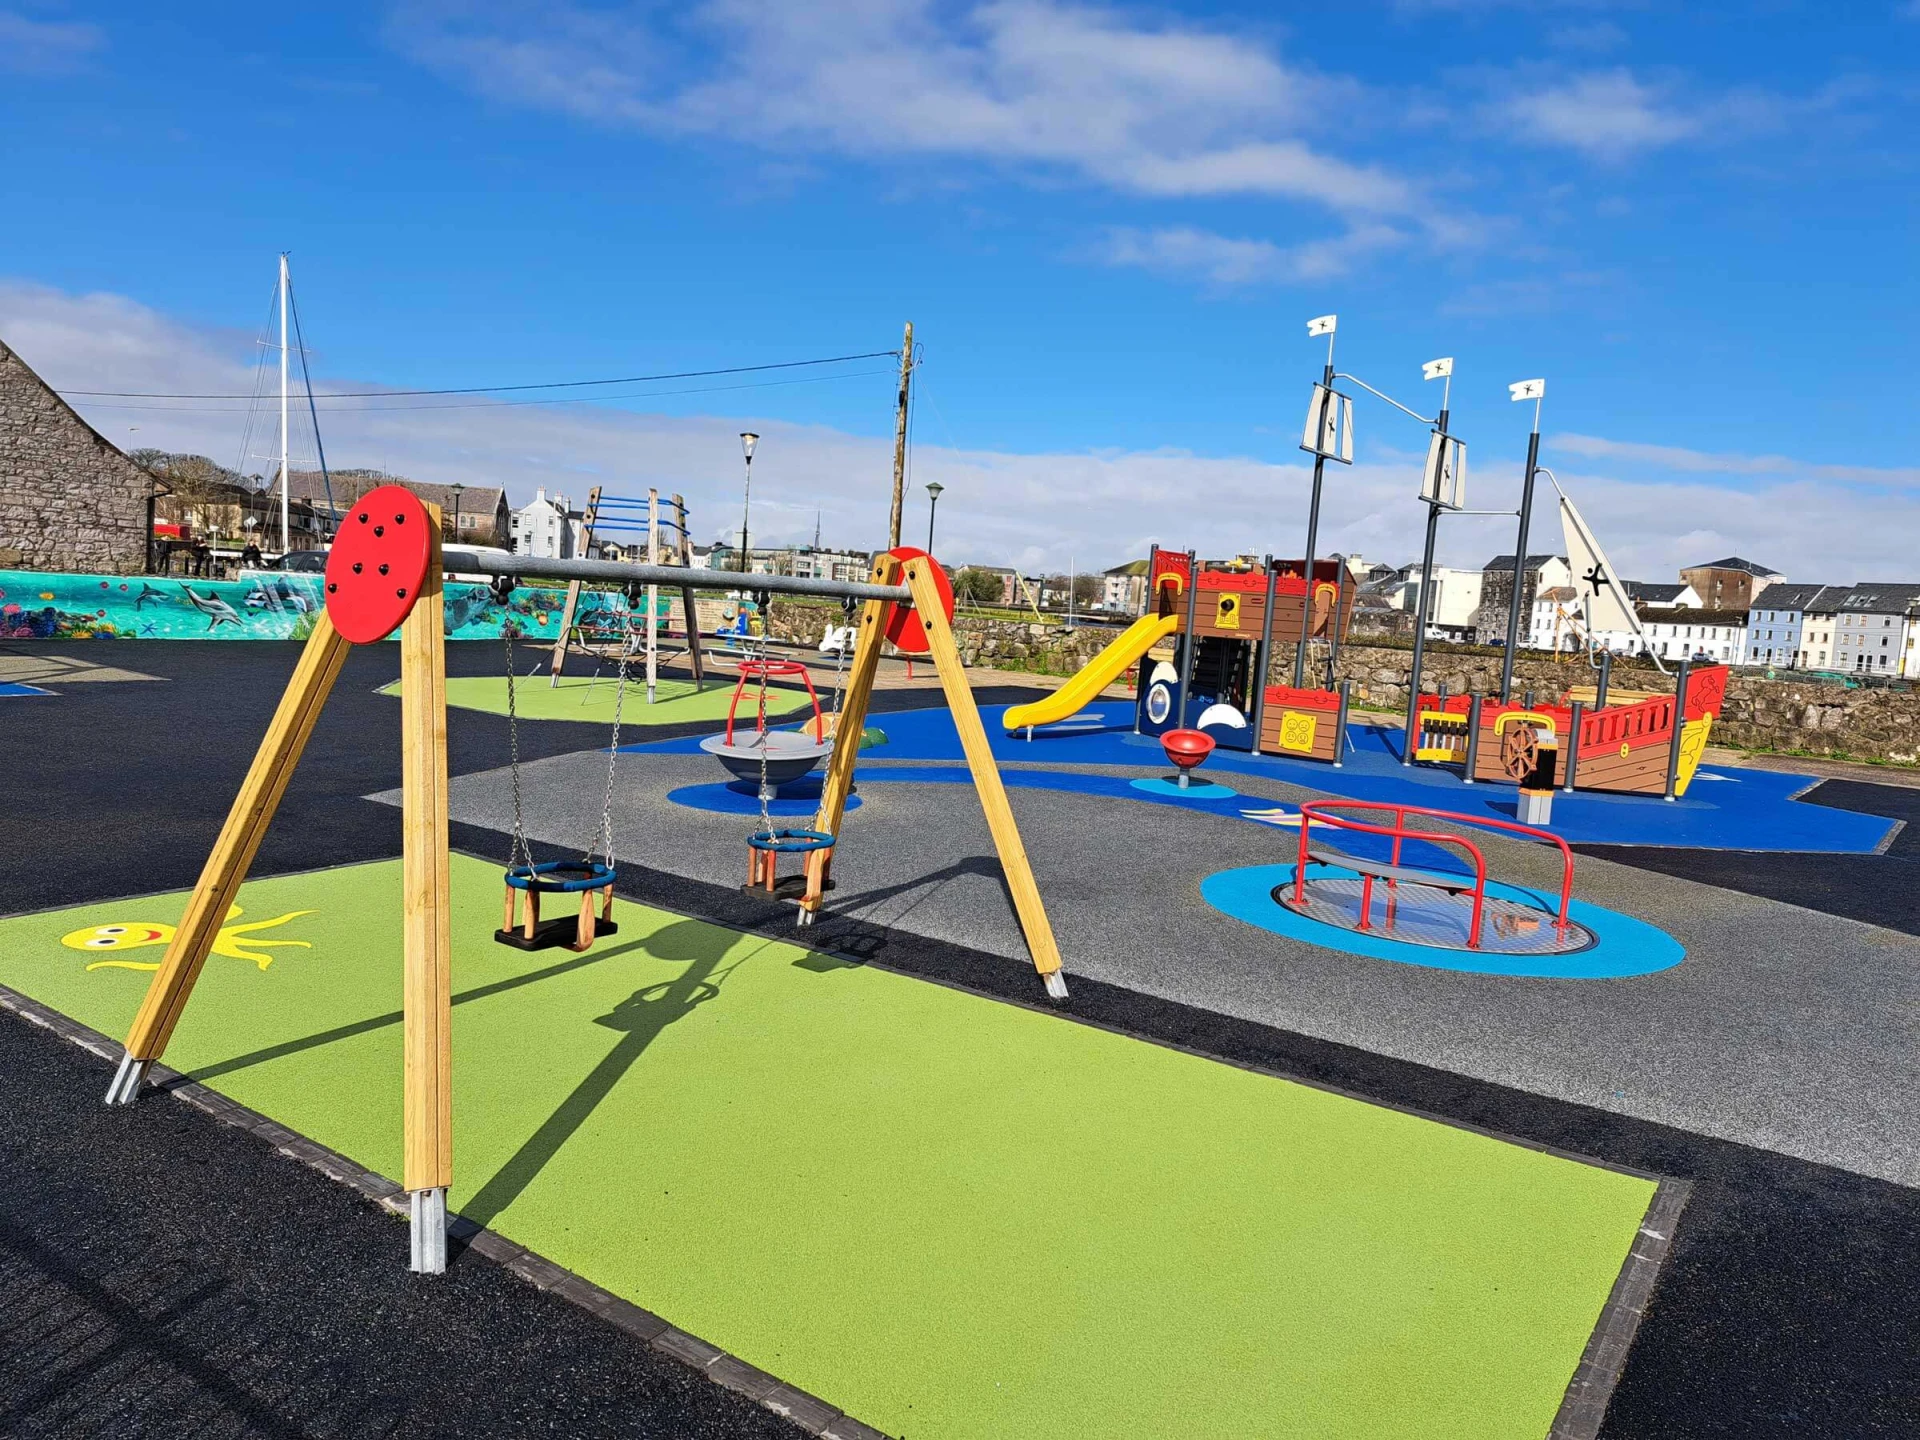 South Park Playground, Claddagh Galway - Image 2